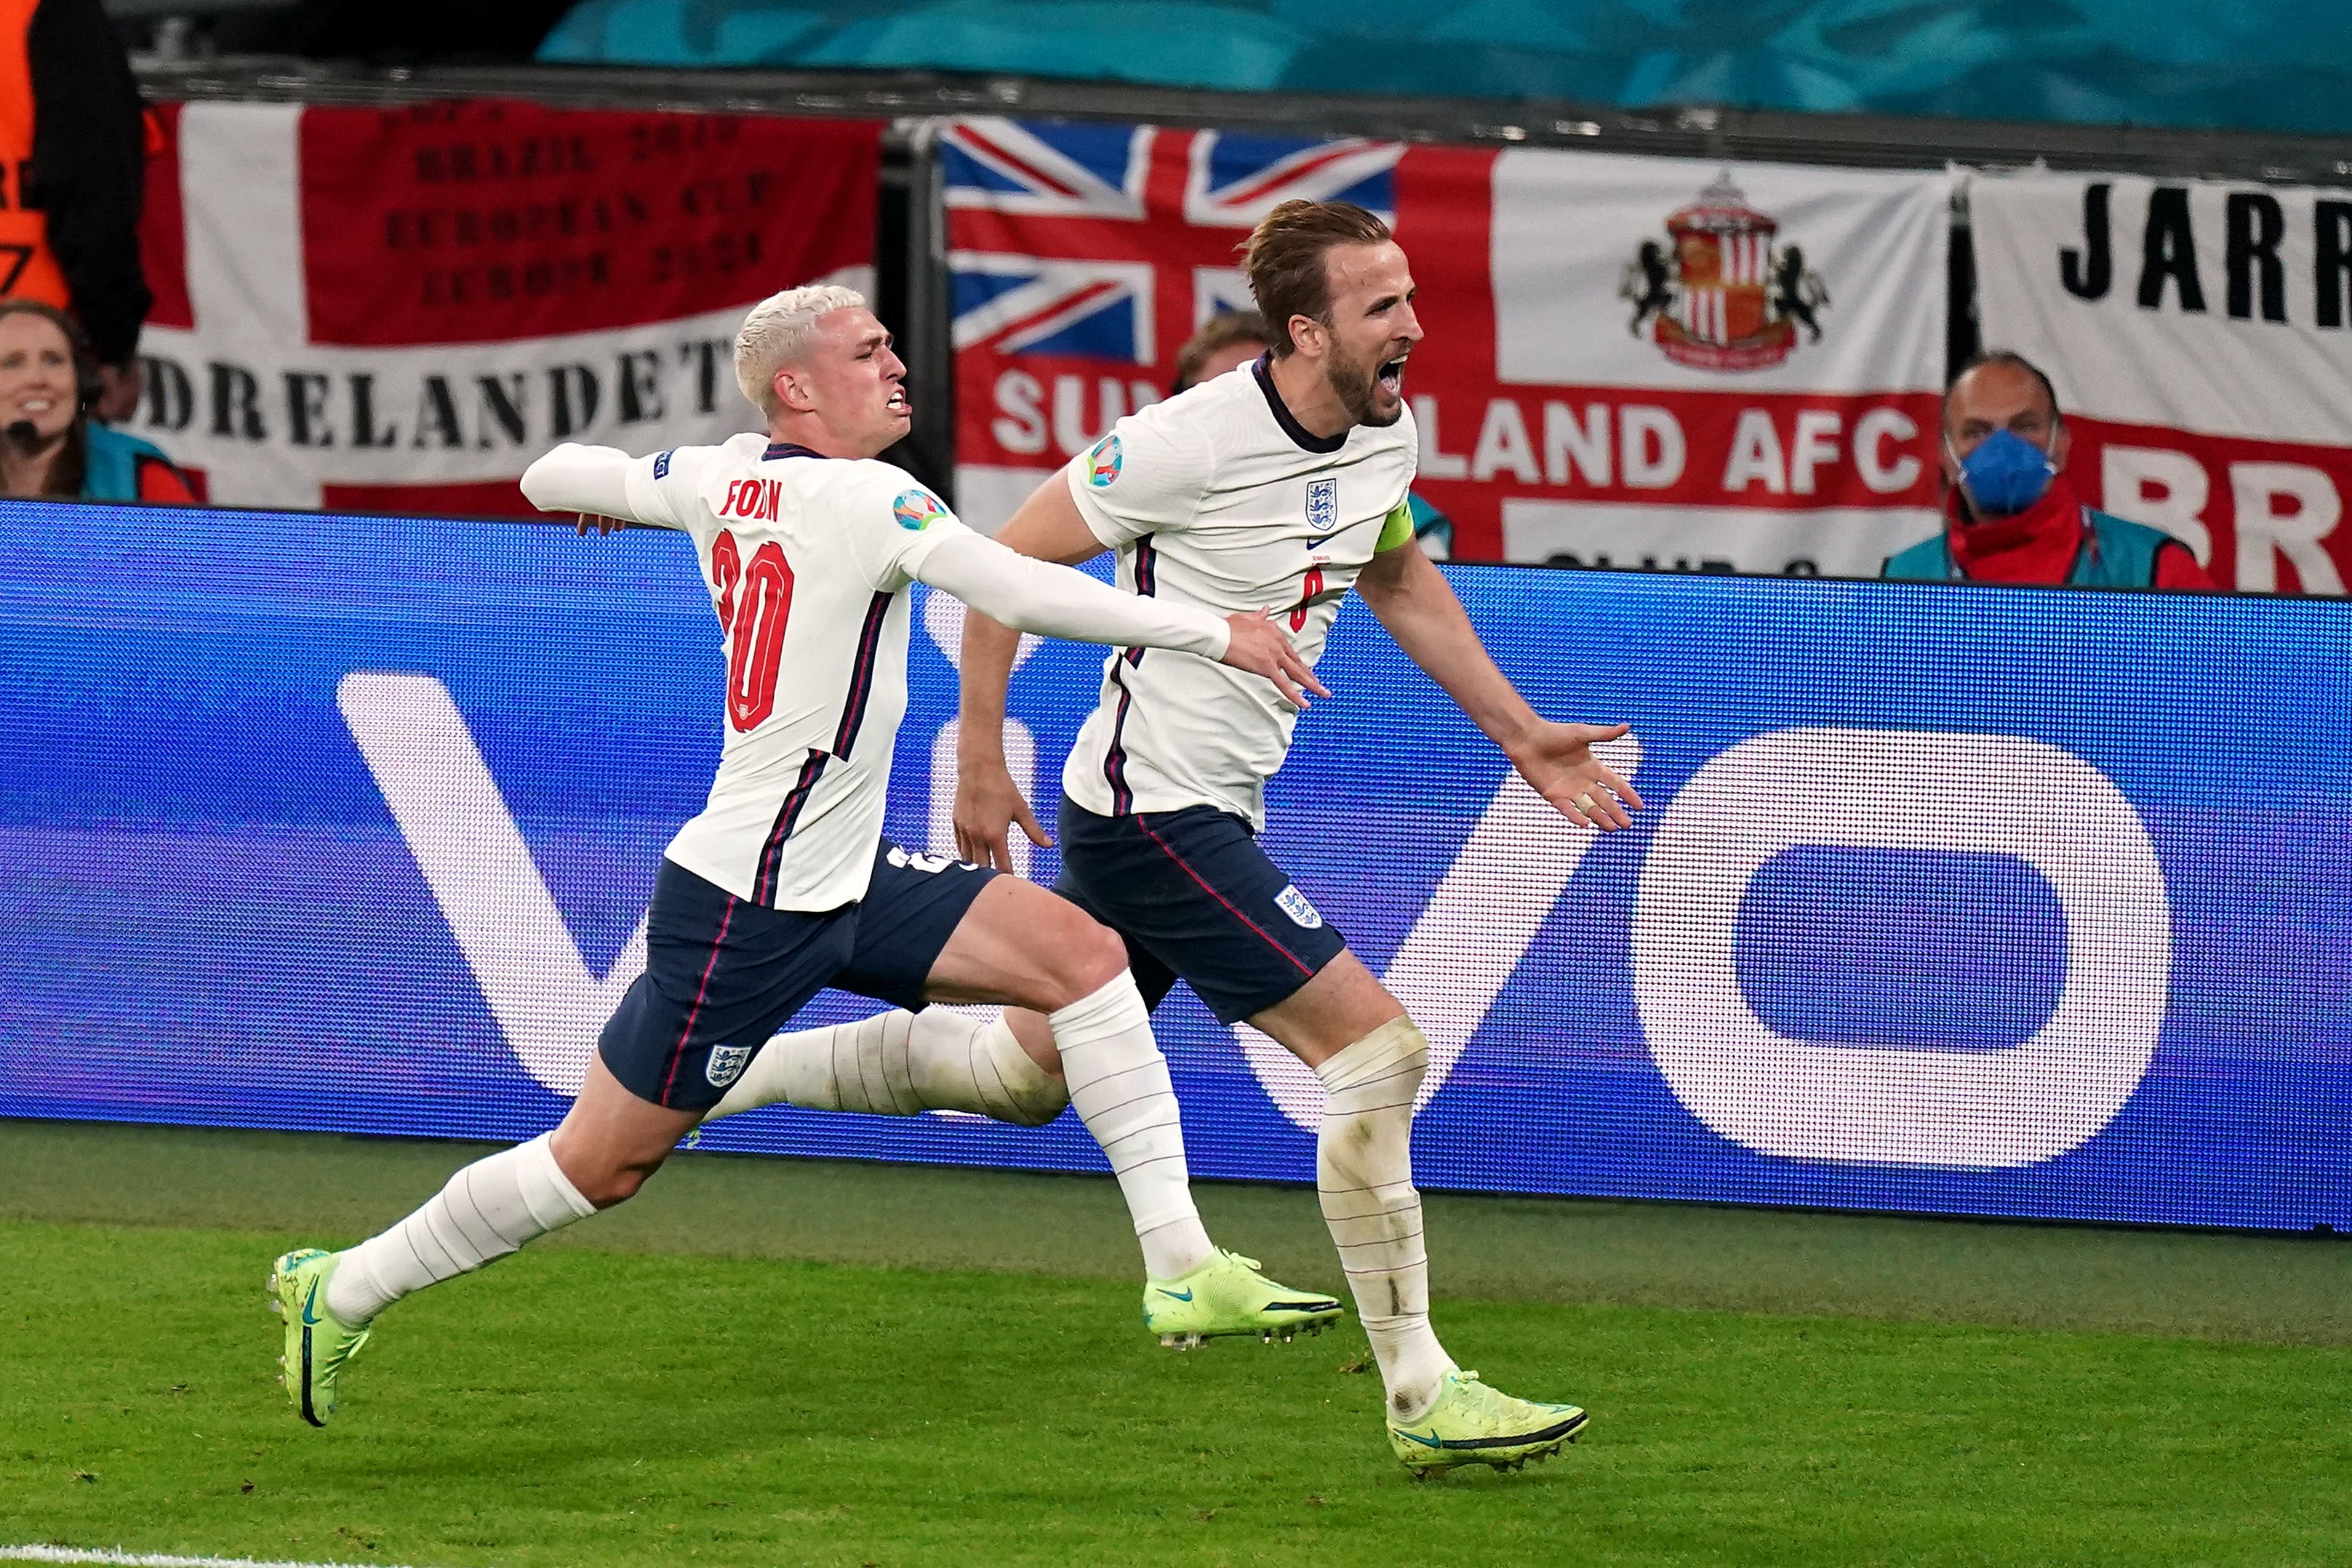 Harry Kane scored a memorable goal for England in the Euro 2020 semi-final (Mike Egerton/PA)